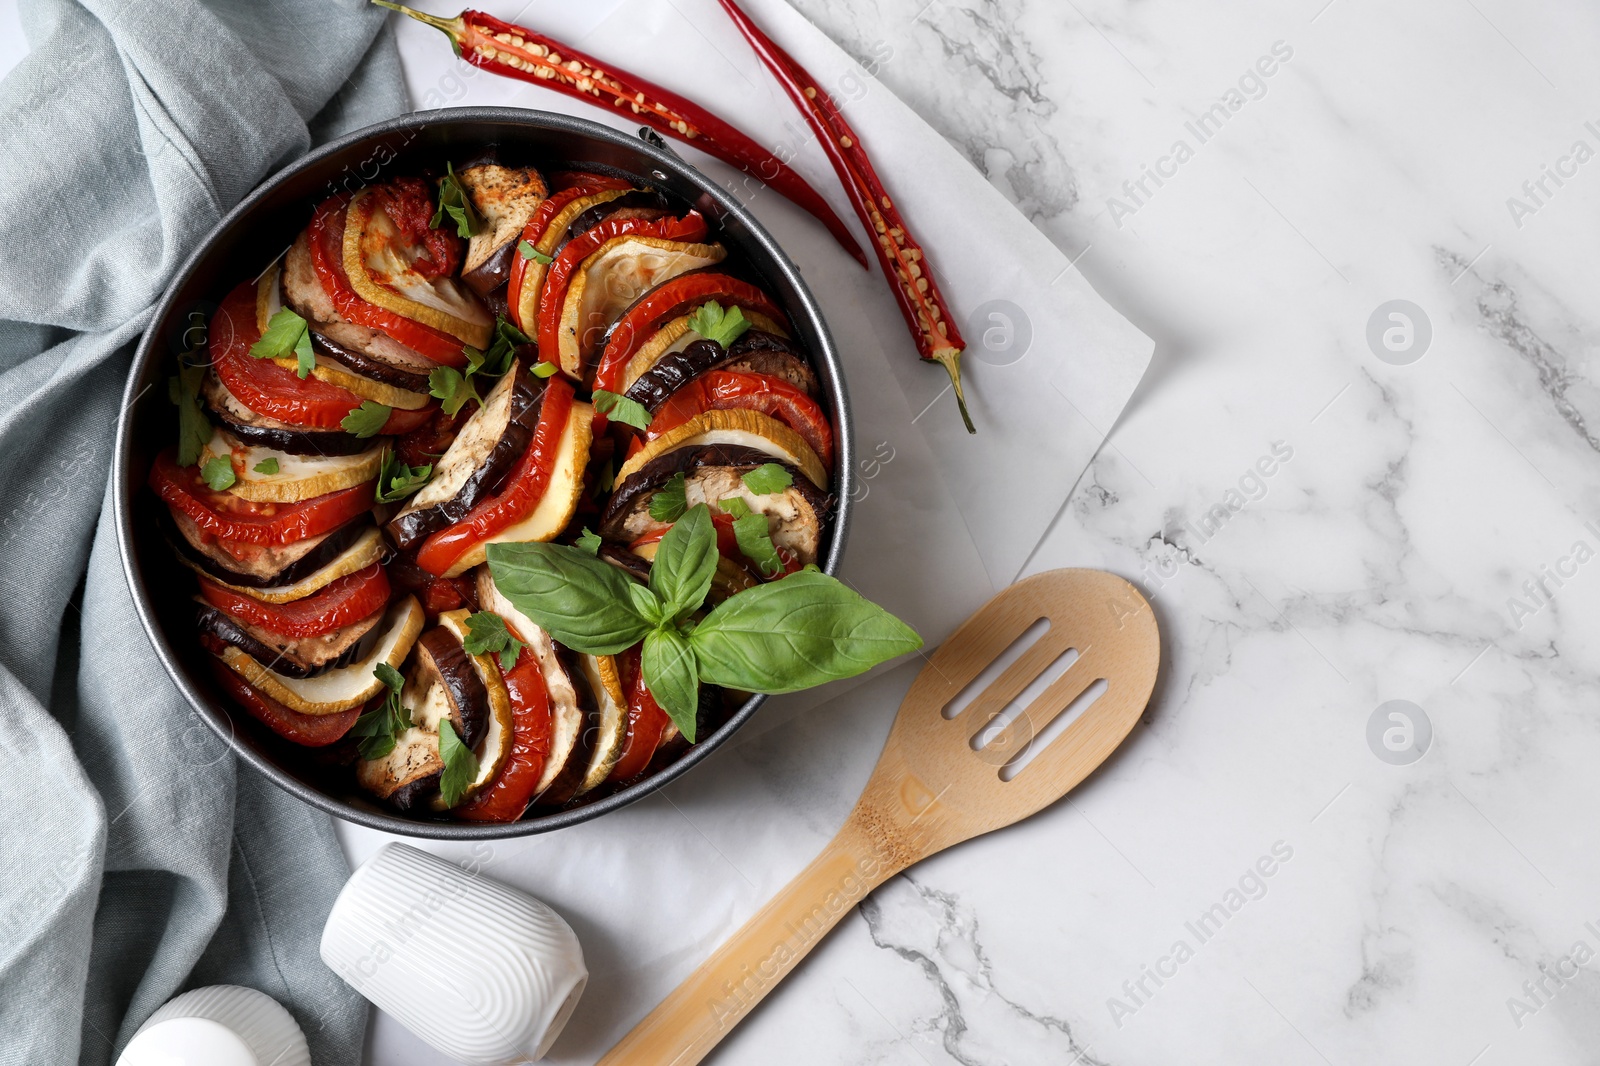 Photo of Delicious ratatouille, chili peppers and spatula on white marble table, flat lay. Space for text